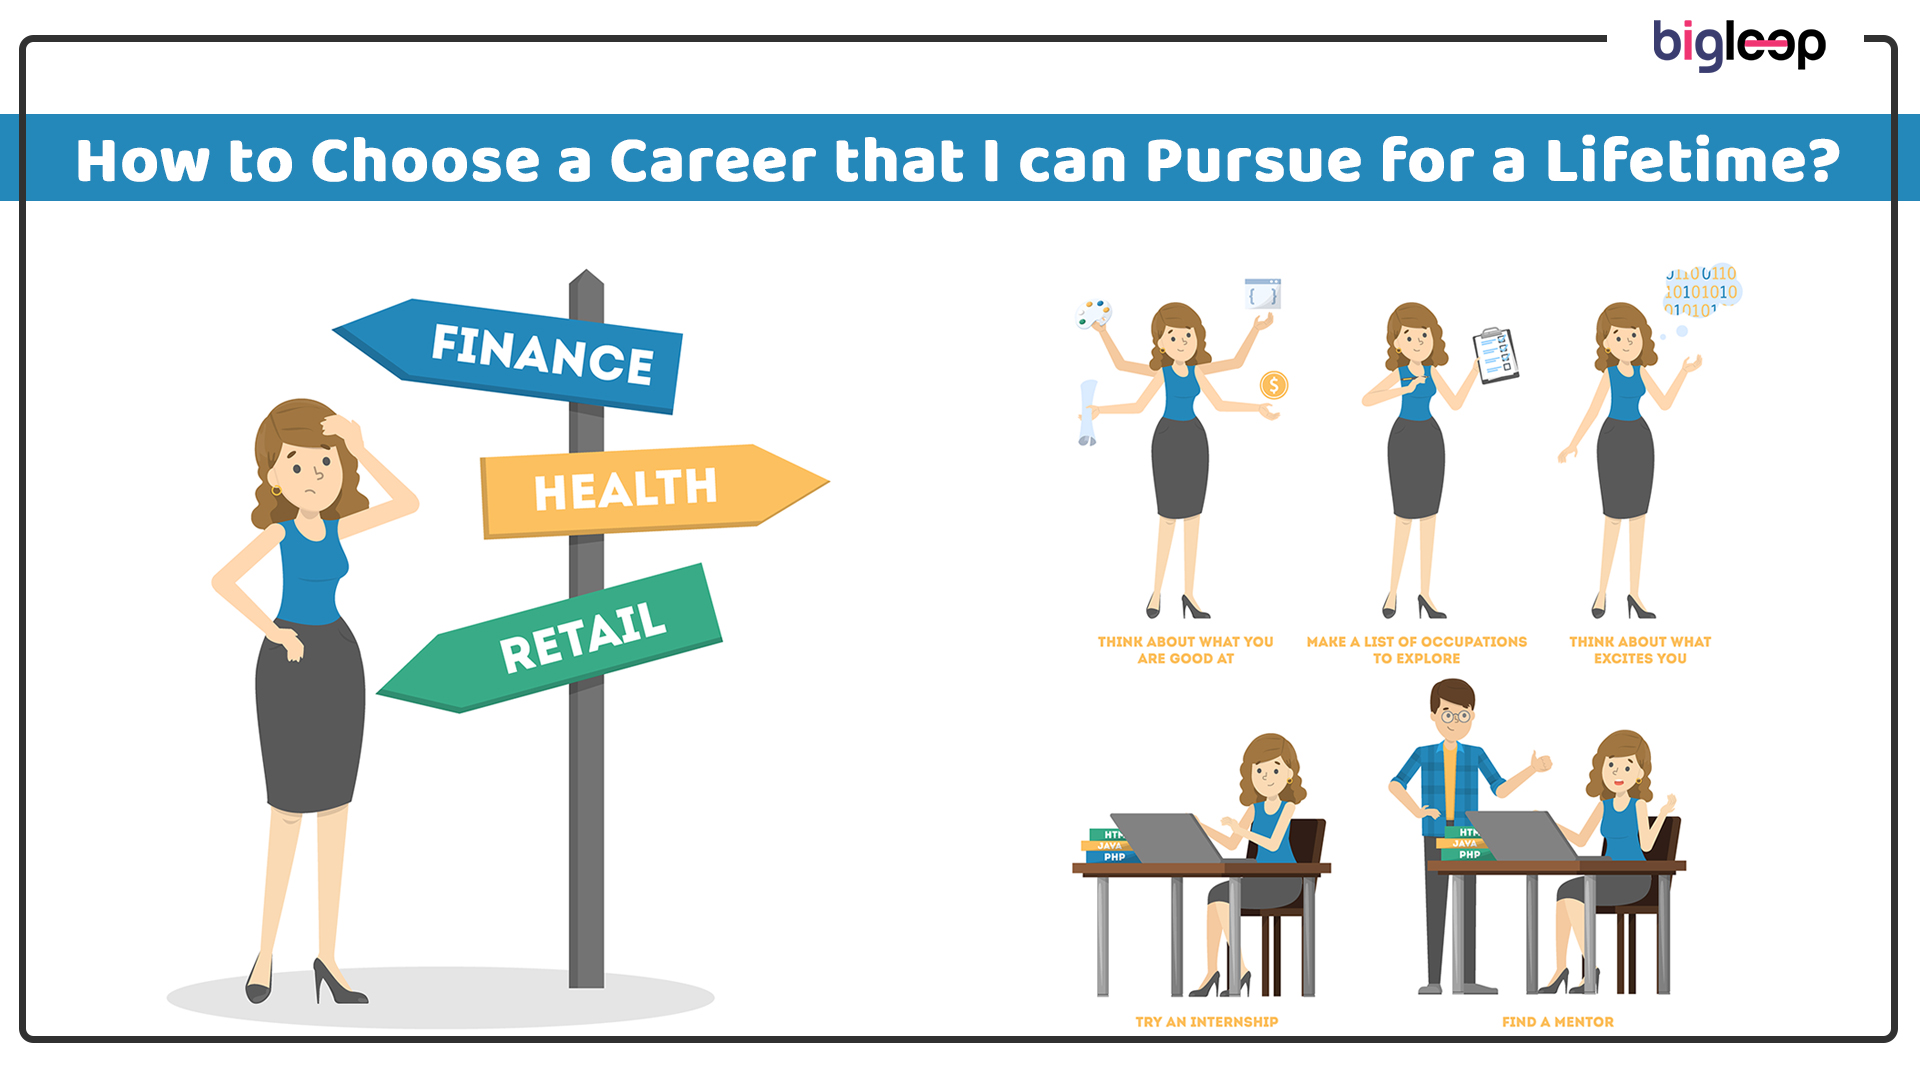 How to Choose a Career that I can Pursue for a Lifetime?